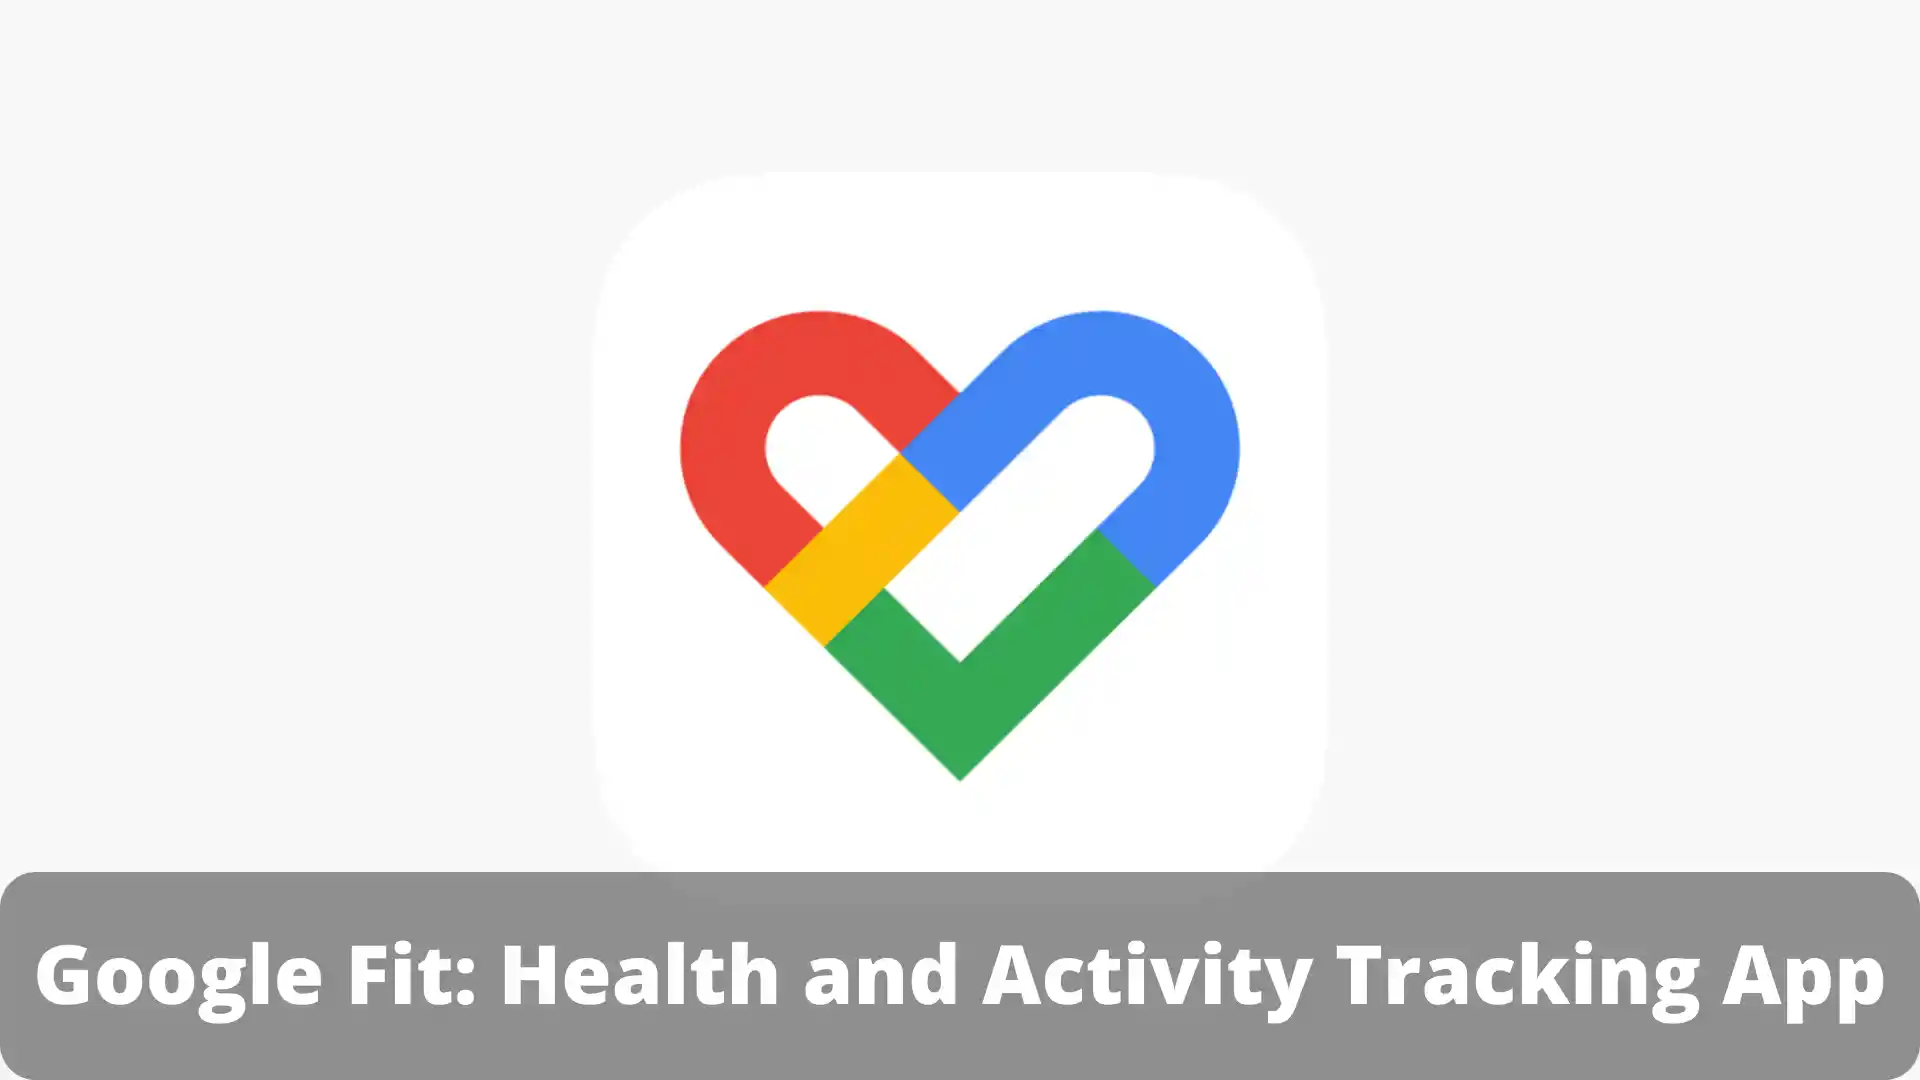 Google Fit: Health and Activity Tracking App